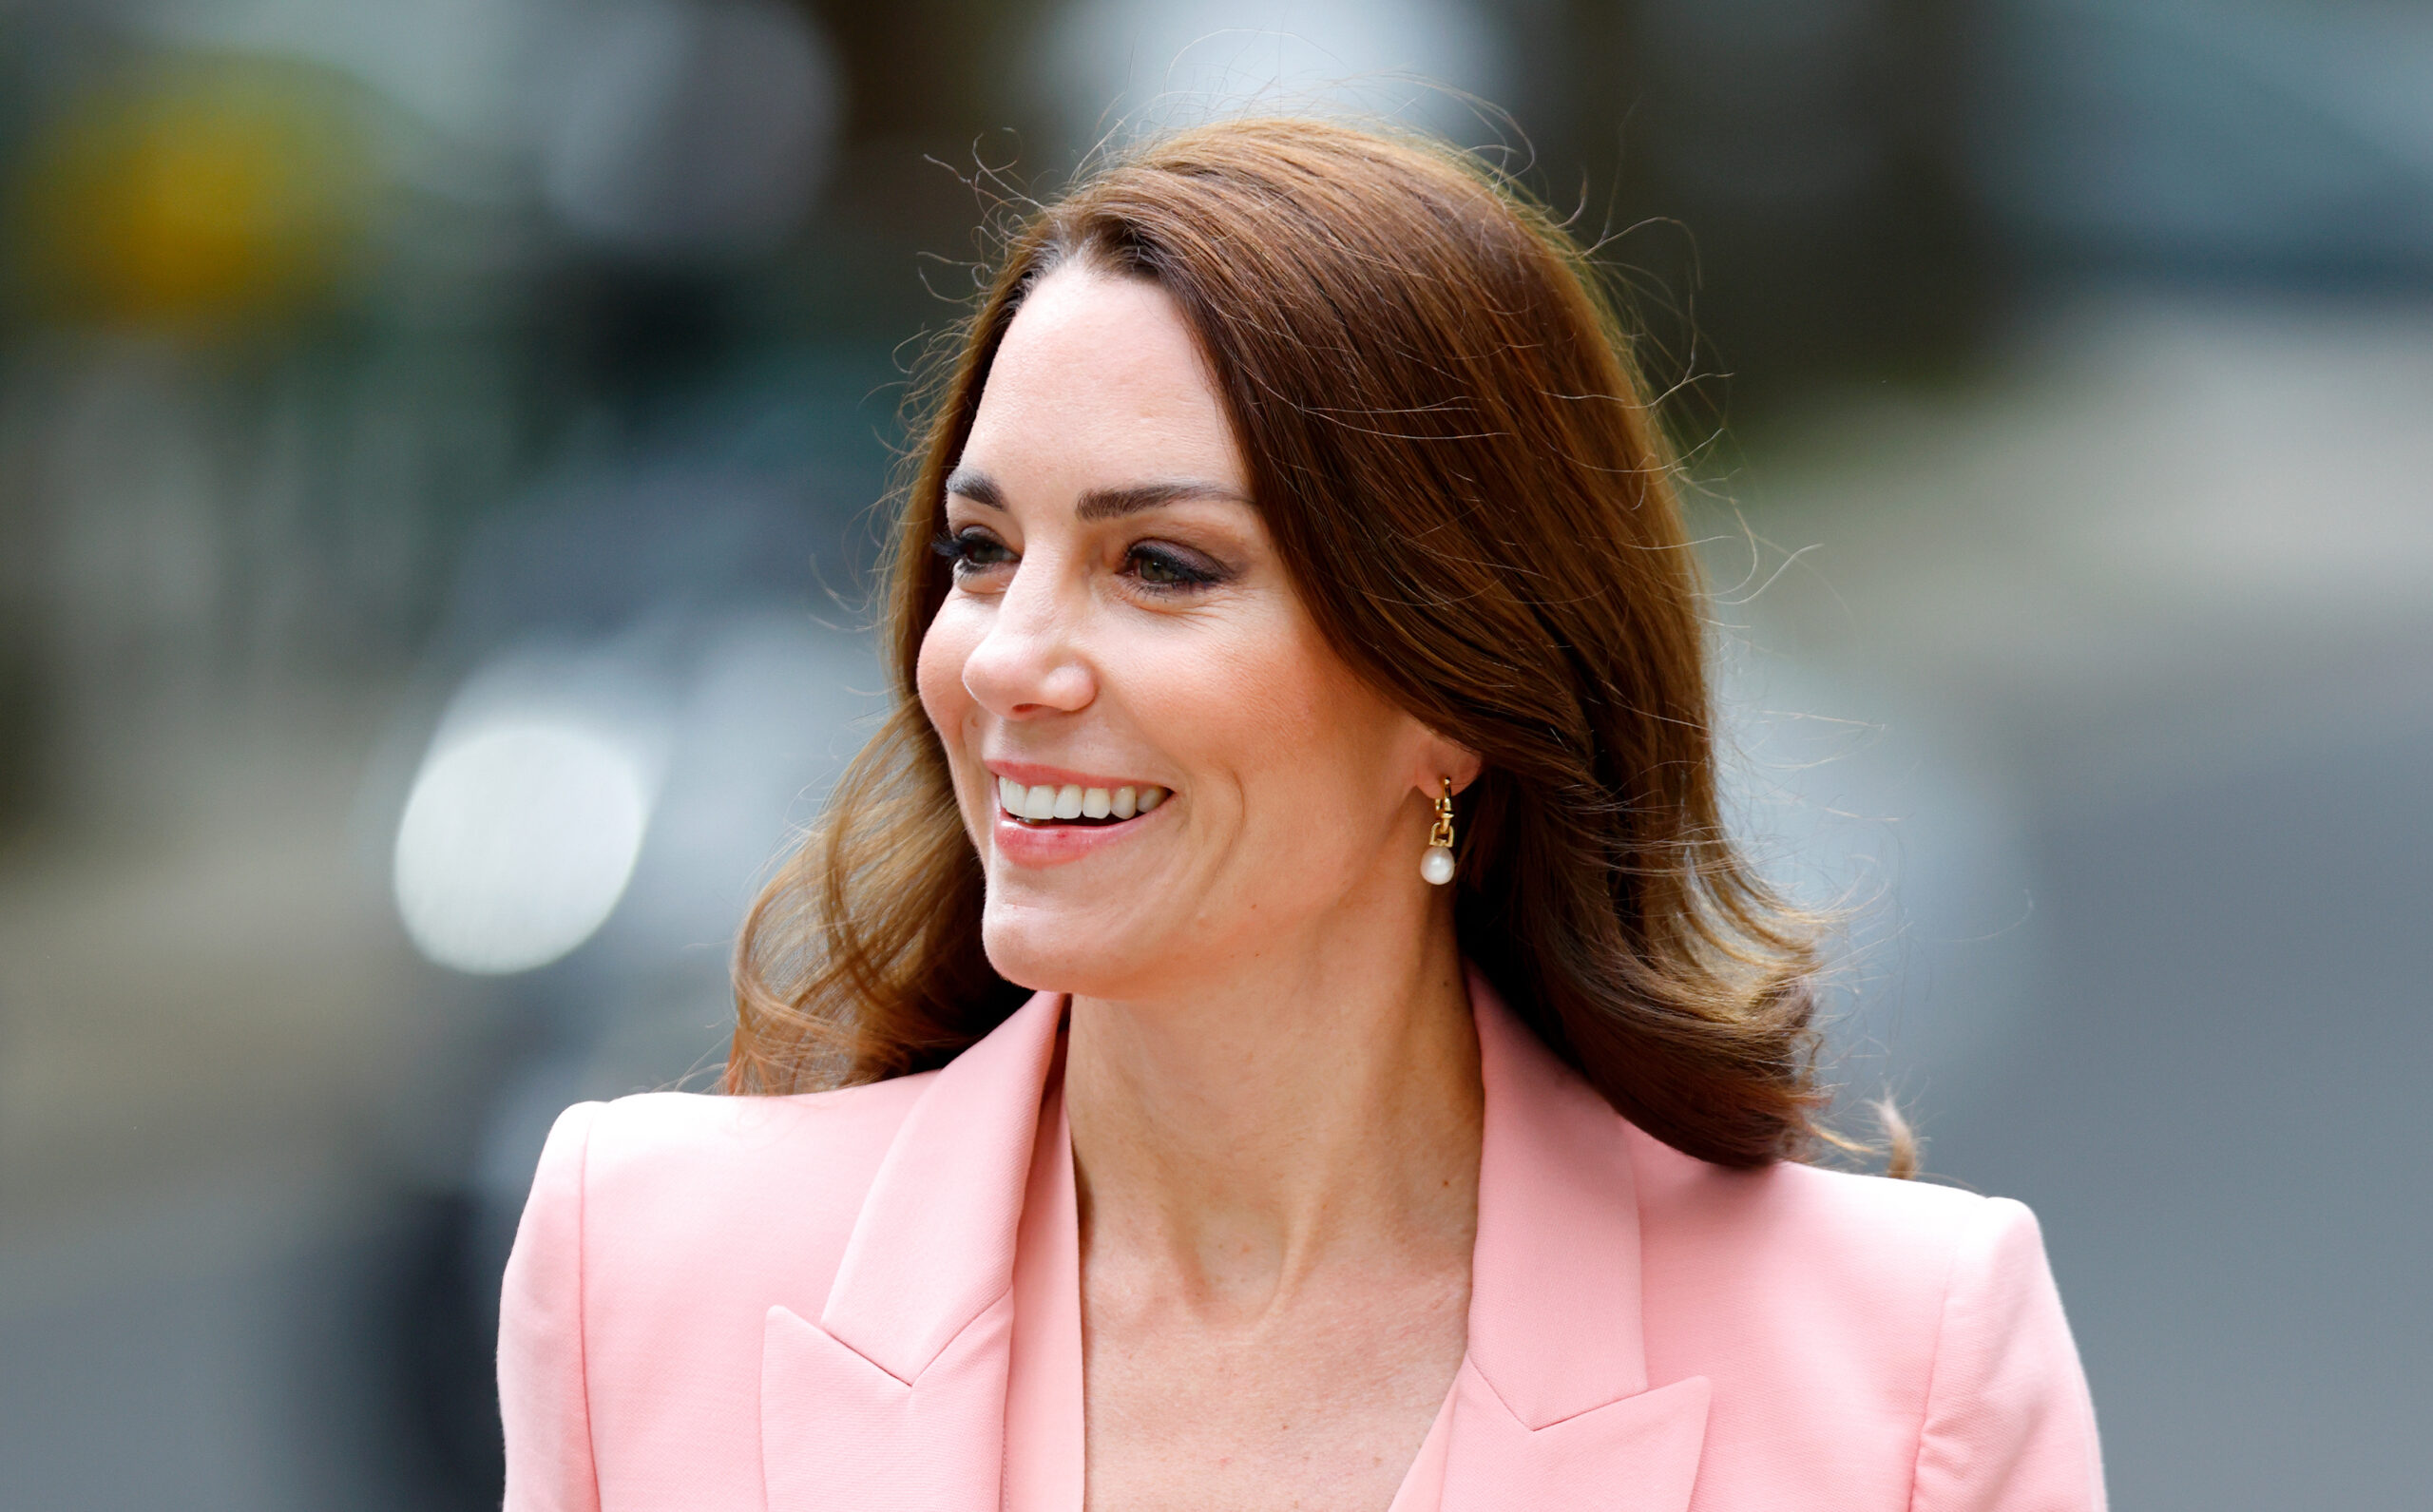 Prince William Provides Update on Kate Middleton During Cancer Journey